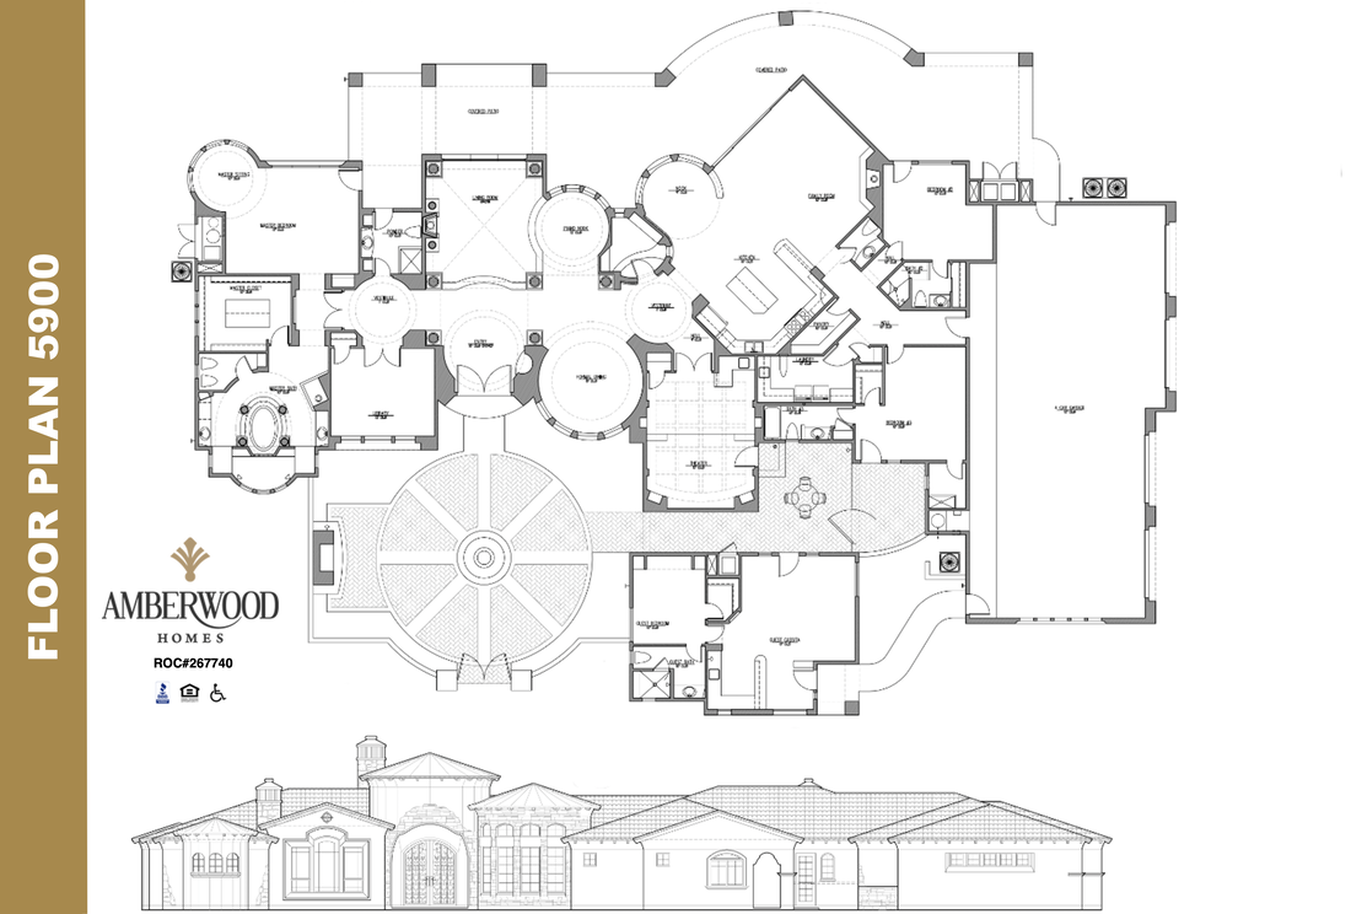 Amber with Holmes floorplans and Designs, by Billy Johnson